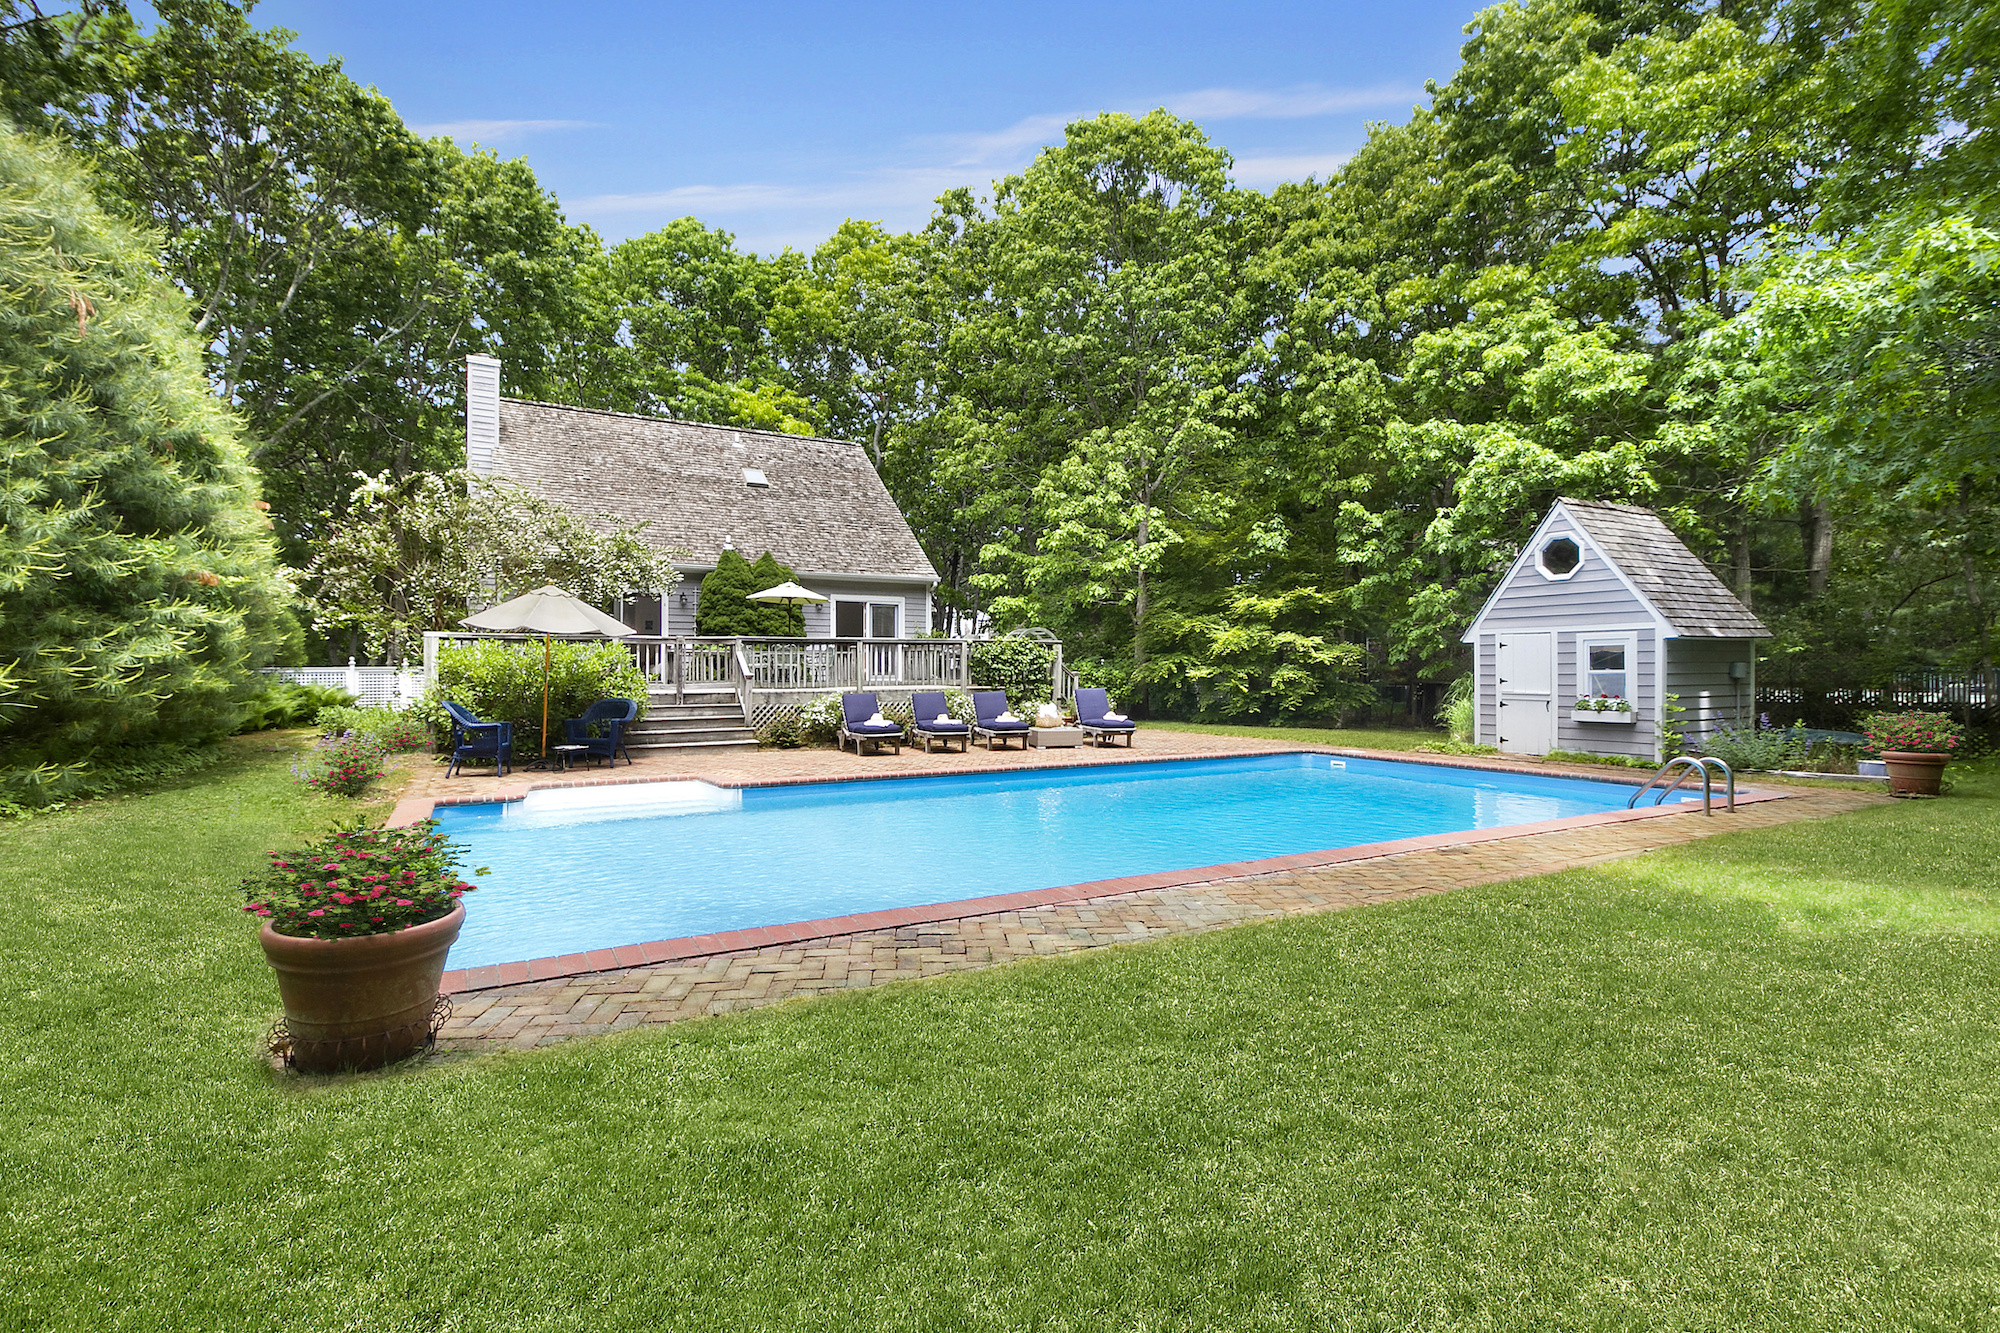 $1.8M Hamptons home is relaxation-ready with crisp interiors and a serene  backyard